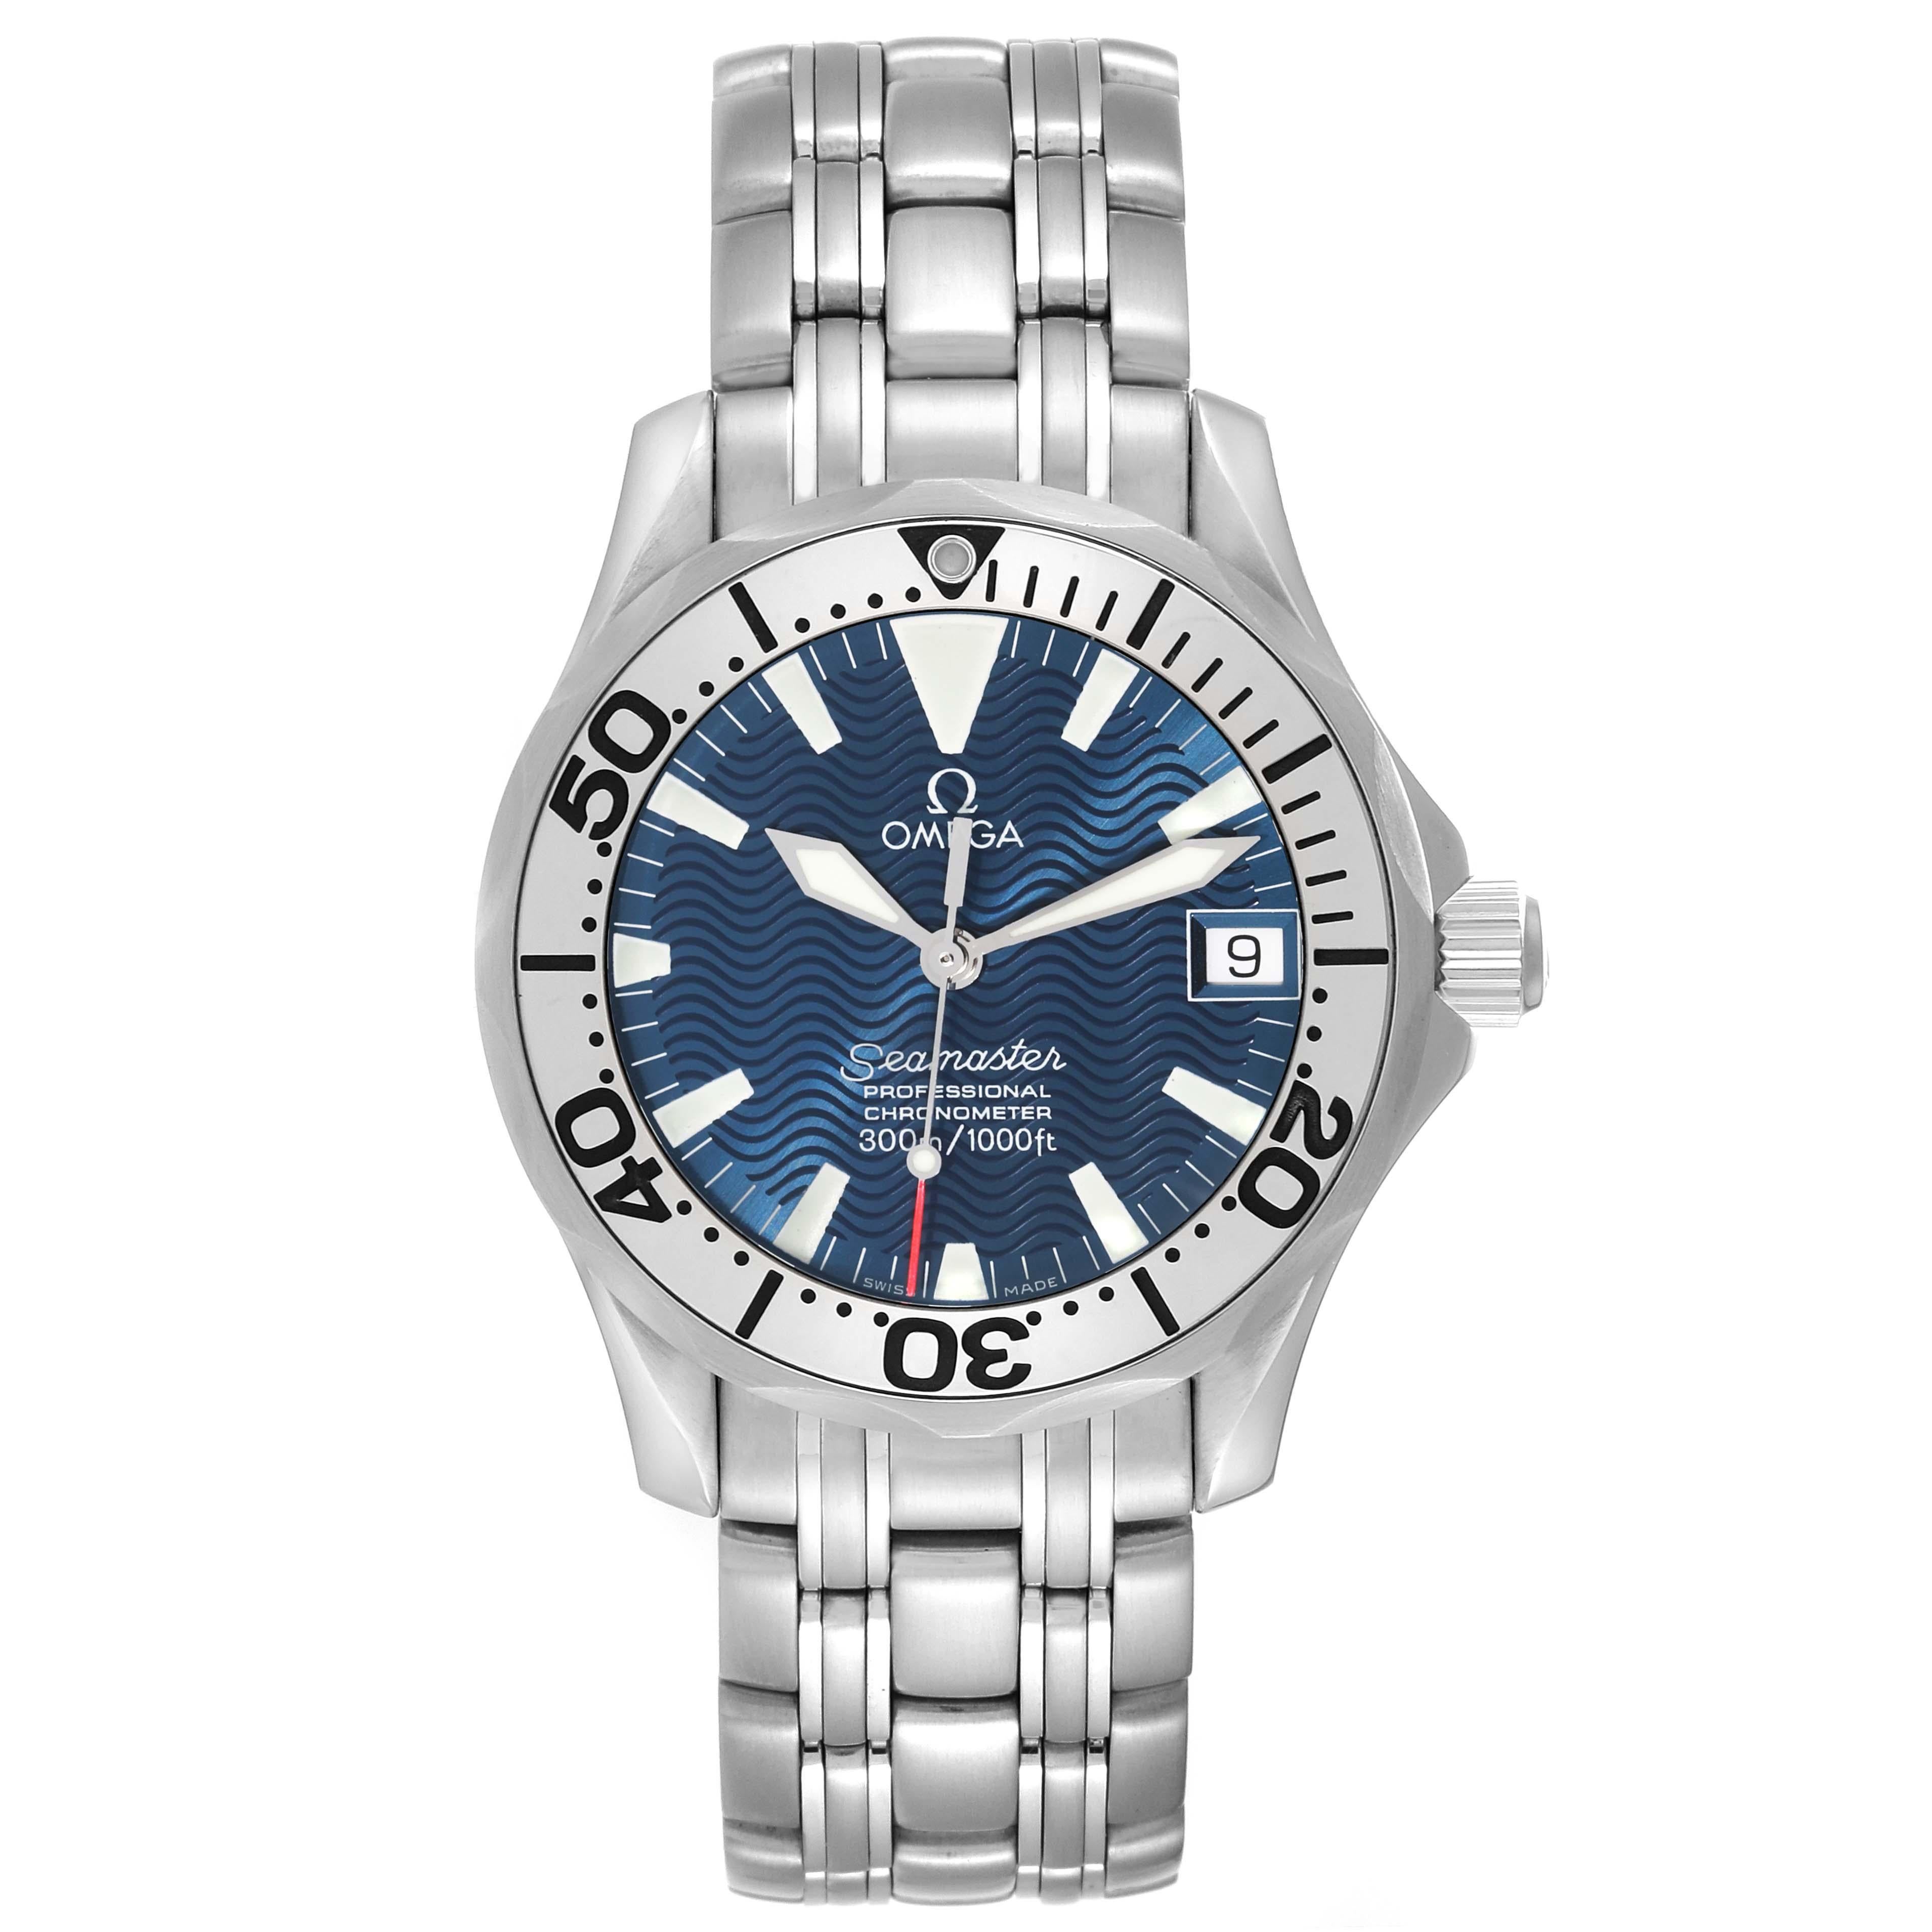 Omega Seamaster 300M Blue Dial Steel Mens Watch 2253.80.00. Officially certified chronometer automatic self-winding movement. Caliber 1120. Stainless steel case 36.25 mm in diameter. Omega logo on a crown. Stainless steel unidirectional rotating